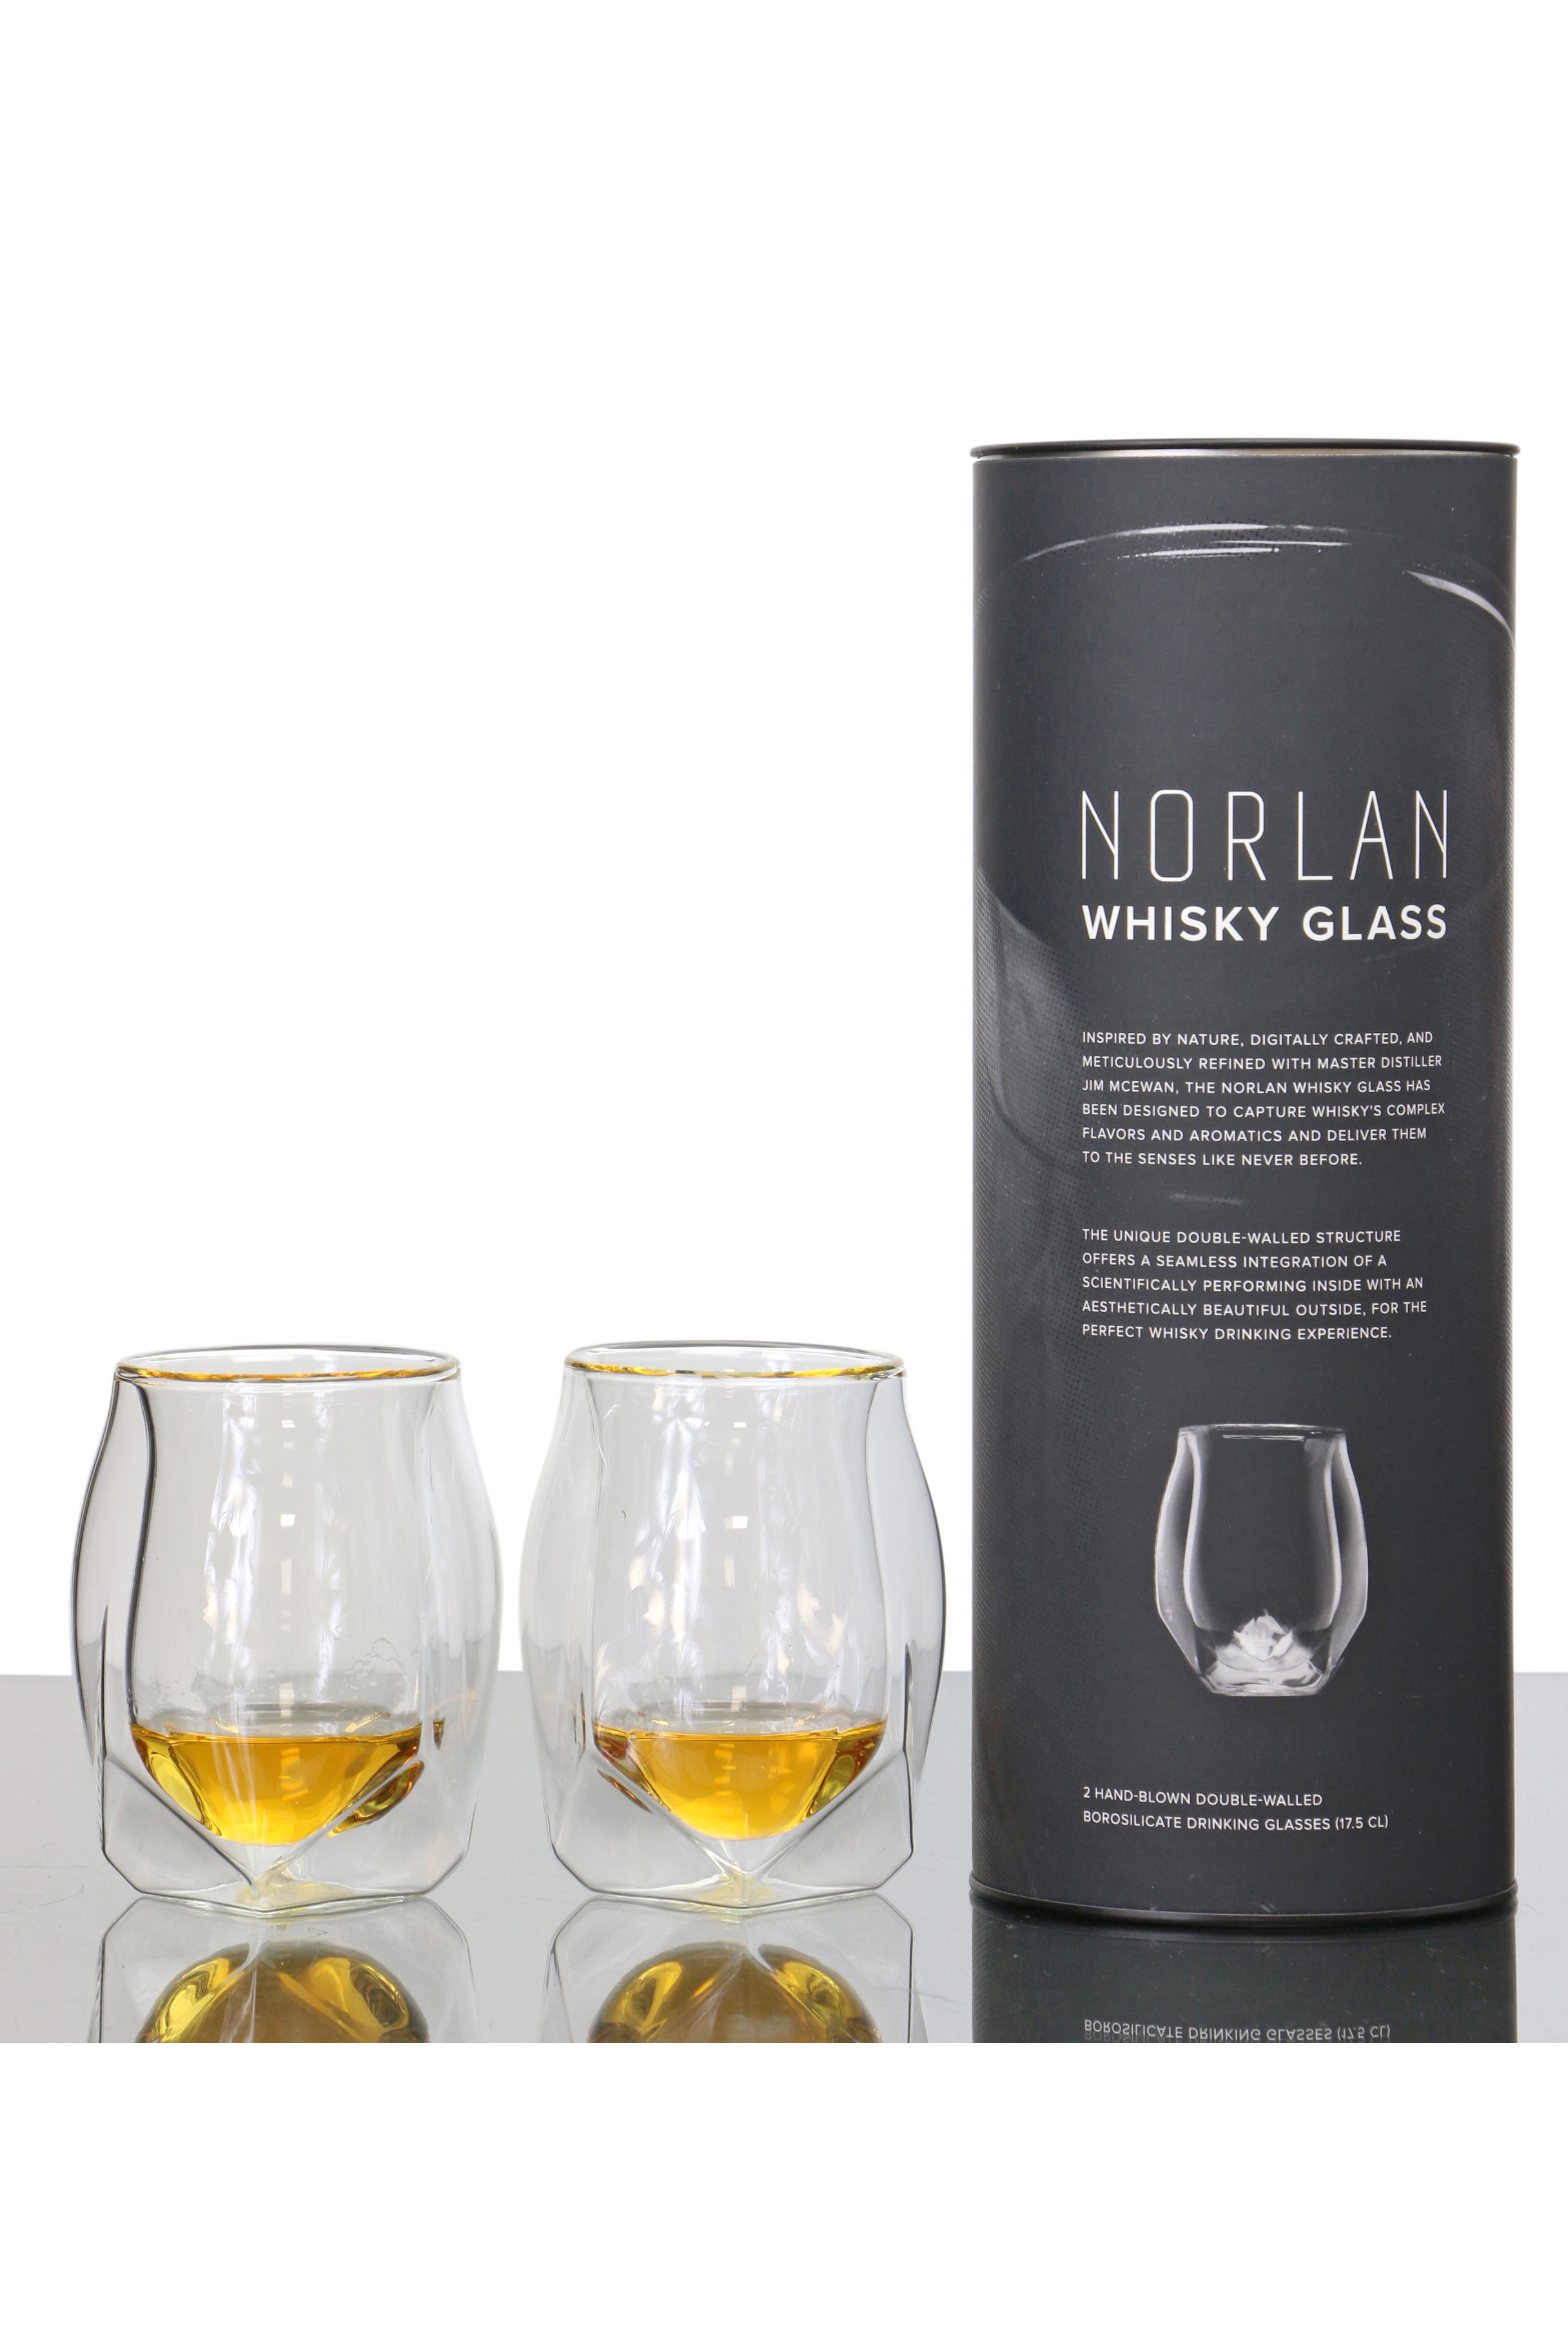 Hands on with The Norlan Glass